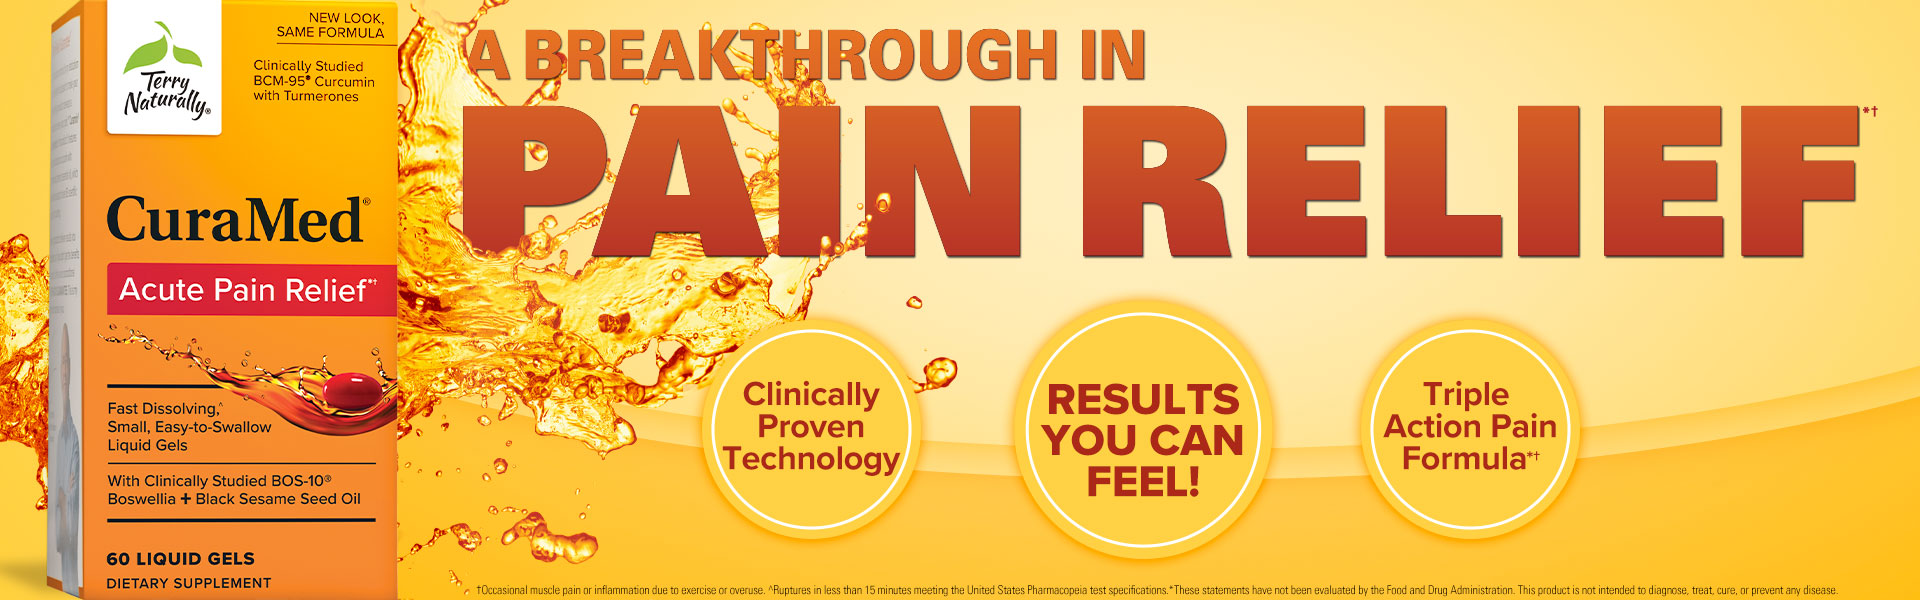 CuraMed® Acute Pain Relief • A BREAKTHROUGH IN PAIN RELIEF • Clinically Proven Technology, Results You Can Feel, Triple Action Pain Formula